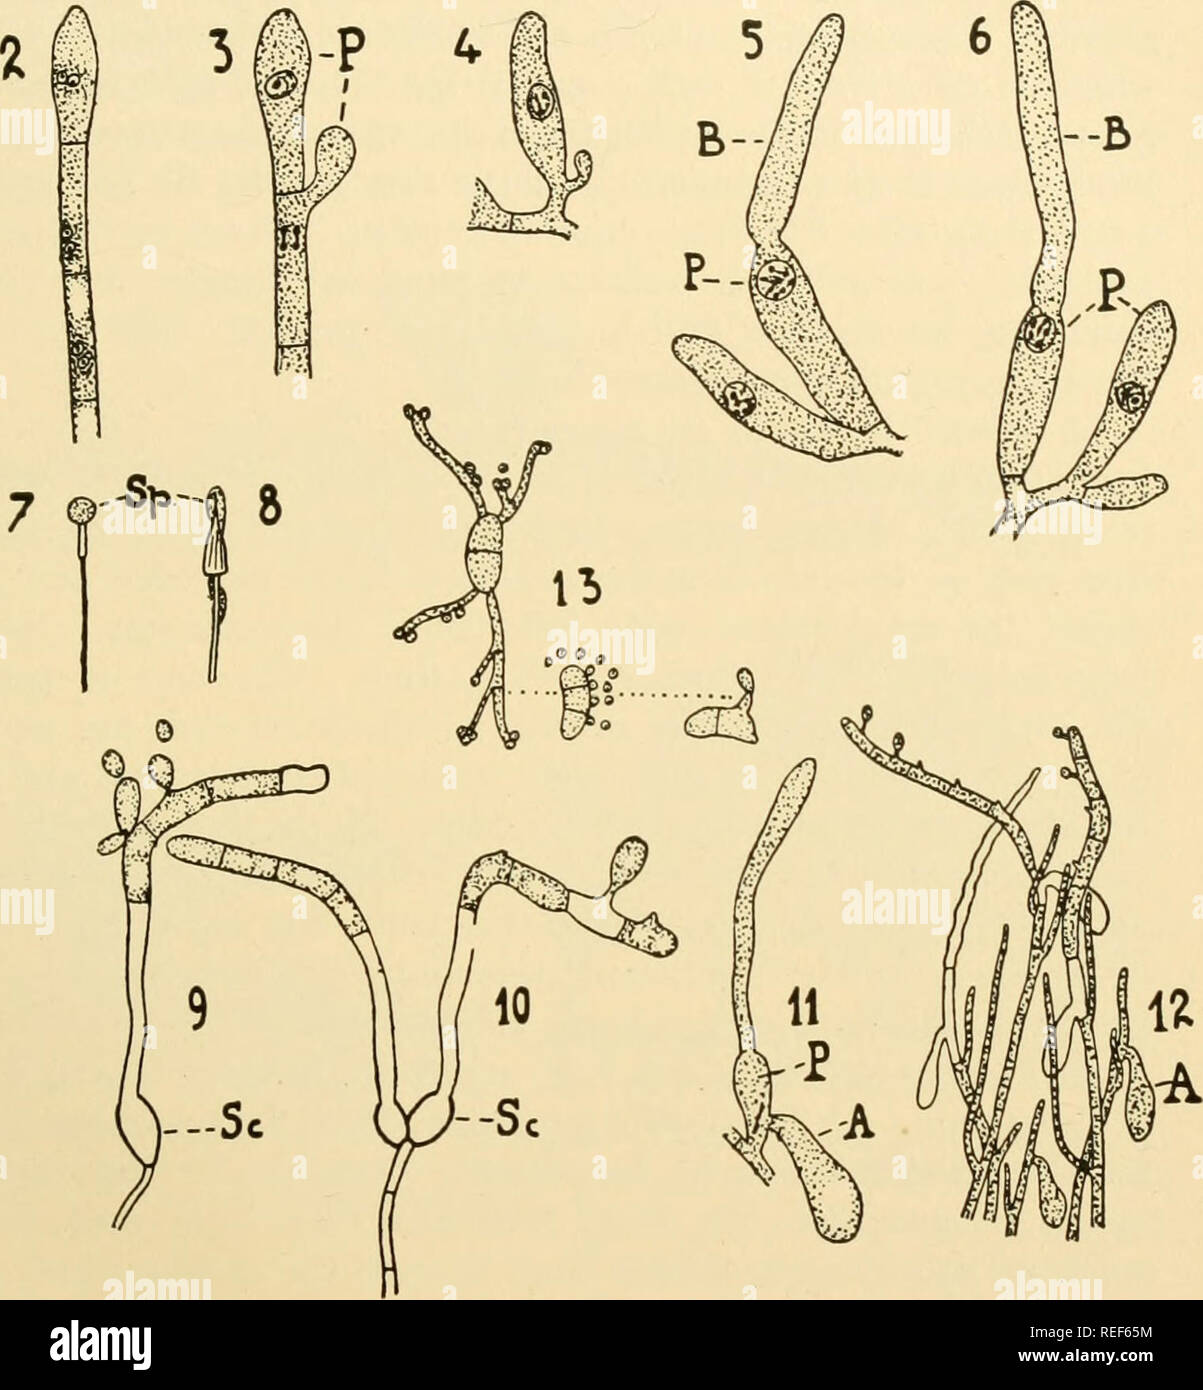 . Comparative morphology of Fungi. Fungi. AURICULARIALES 545 While the younger probasidia continue developing, the older ones germinate to basidia which remain enucleate for a long time (Fig. 364, 5 and 6, B). When they have reached approximately three-fourths of their final length, the diploid nucleus migrates into them and divides nor- mally into four daughter nuclei which slip out into the basidiospores. In /. Hookeriarum, the sterigmata are of unequal length and elevate the. Fig. 364.—Iola javanetisis. 1 to 6. Development of probasidia. 7. Spherical fructi- fication, Sp, on sporogonium of  Stock Photo